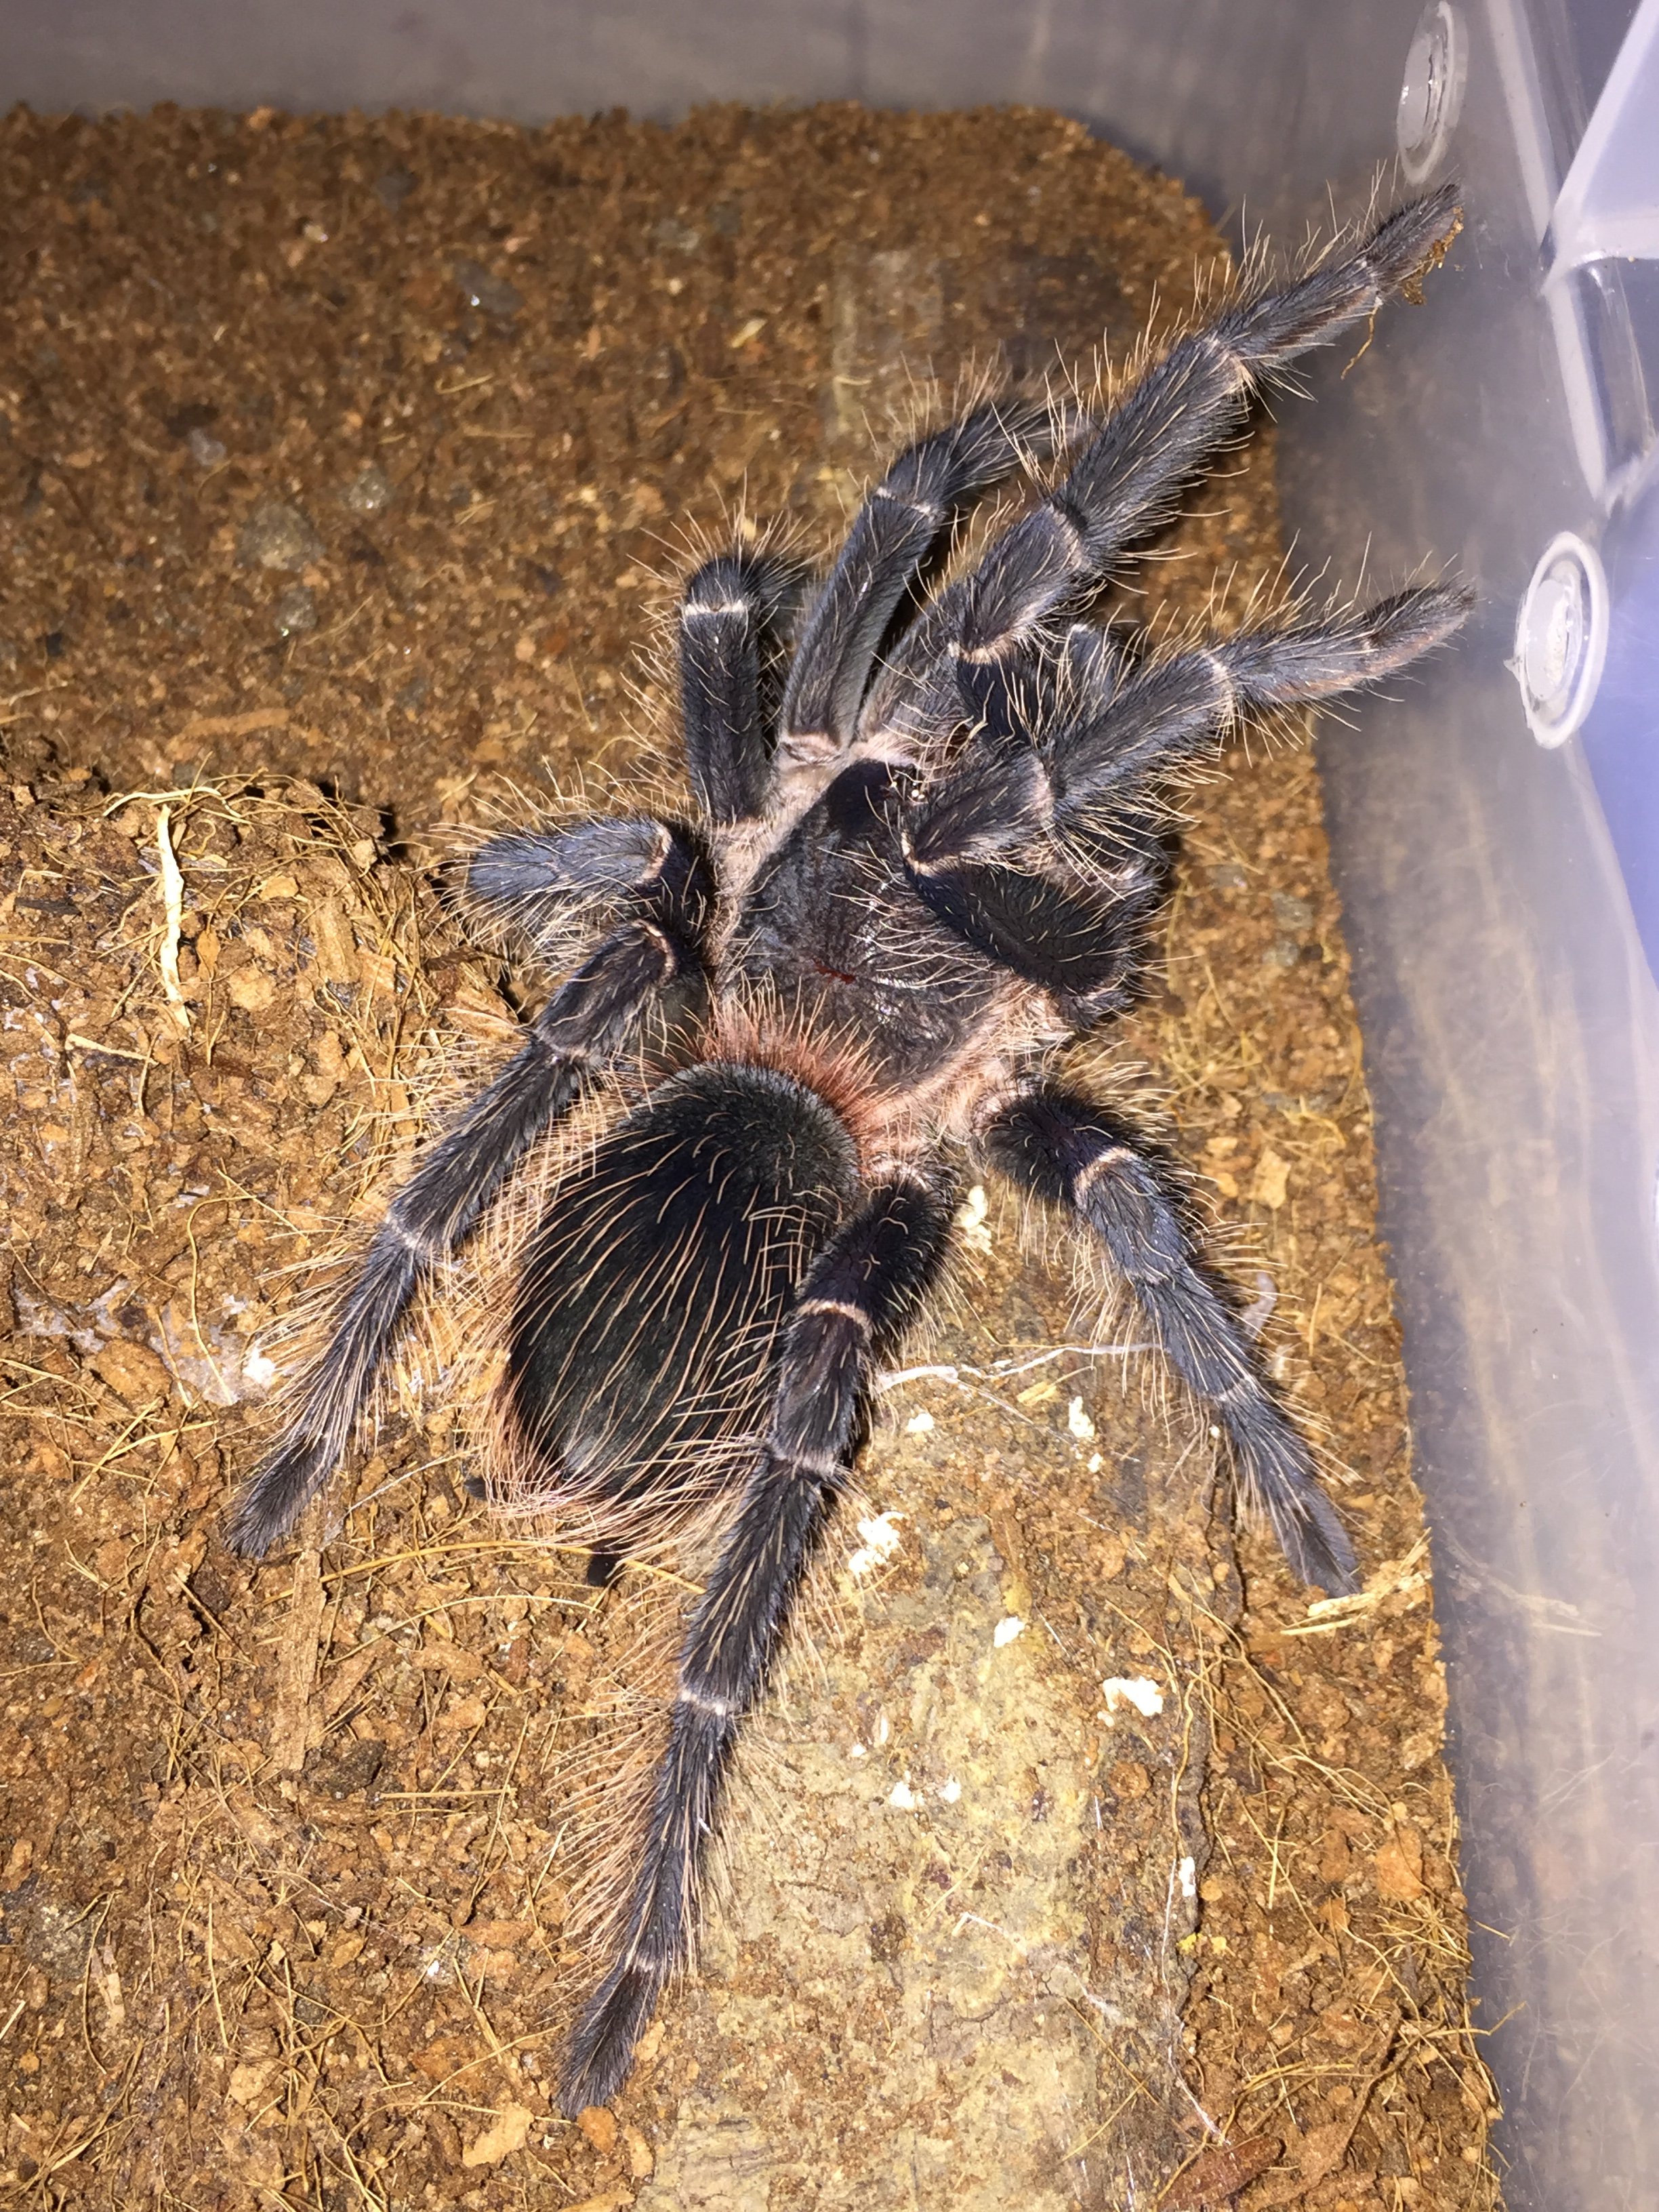 LP freshly molted